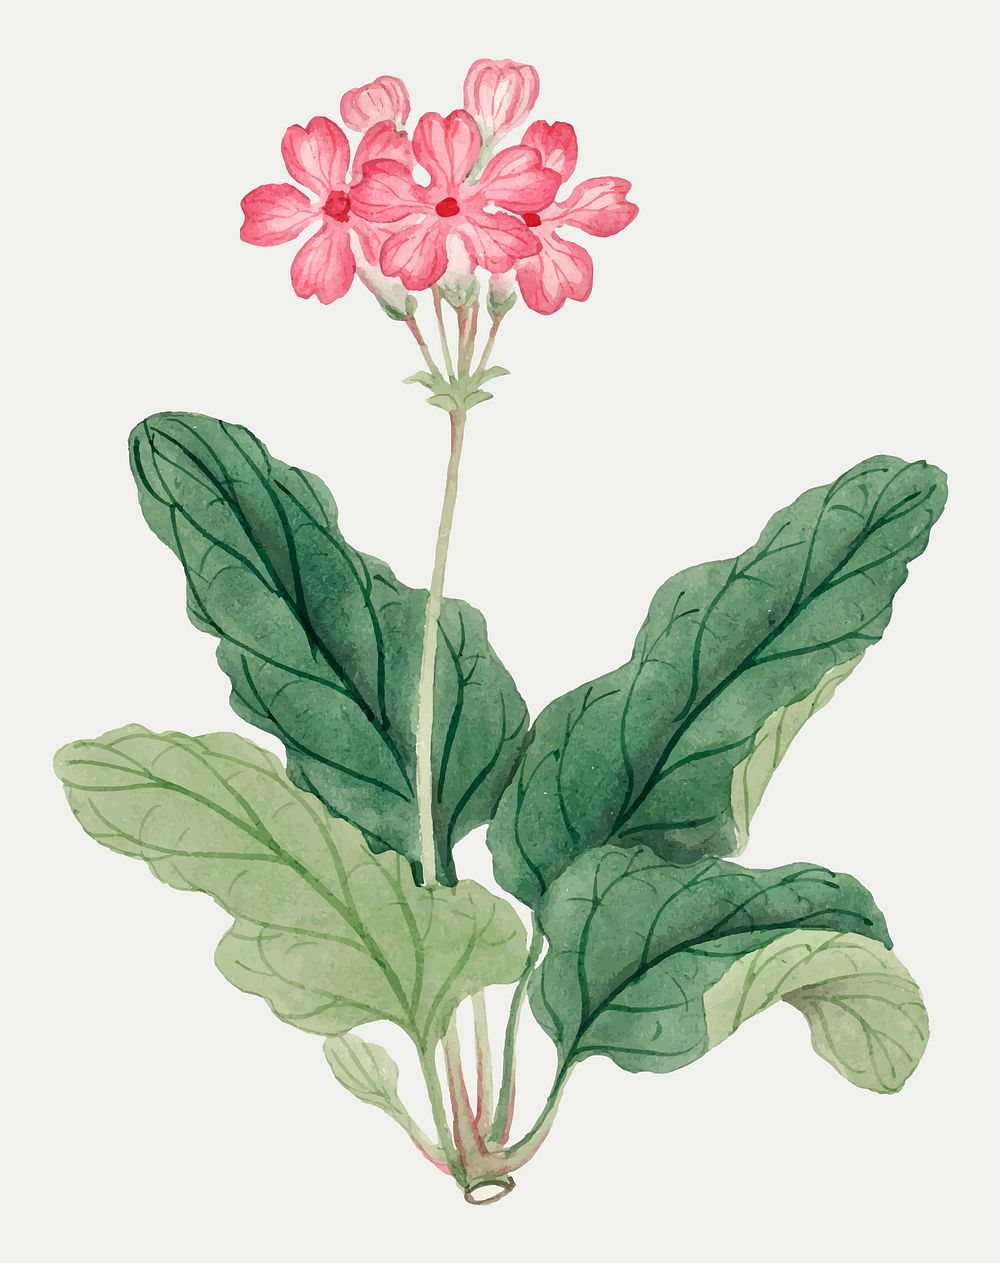 Floral vector design element Pink Geranium, vintage Japanese art remix from the David Murray collection